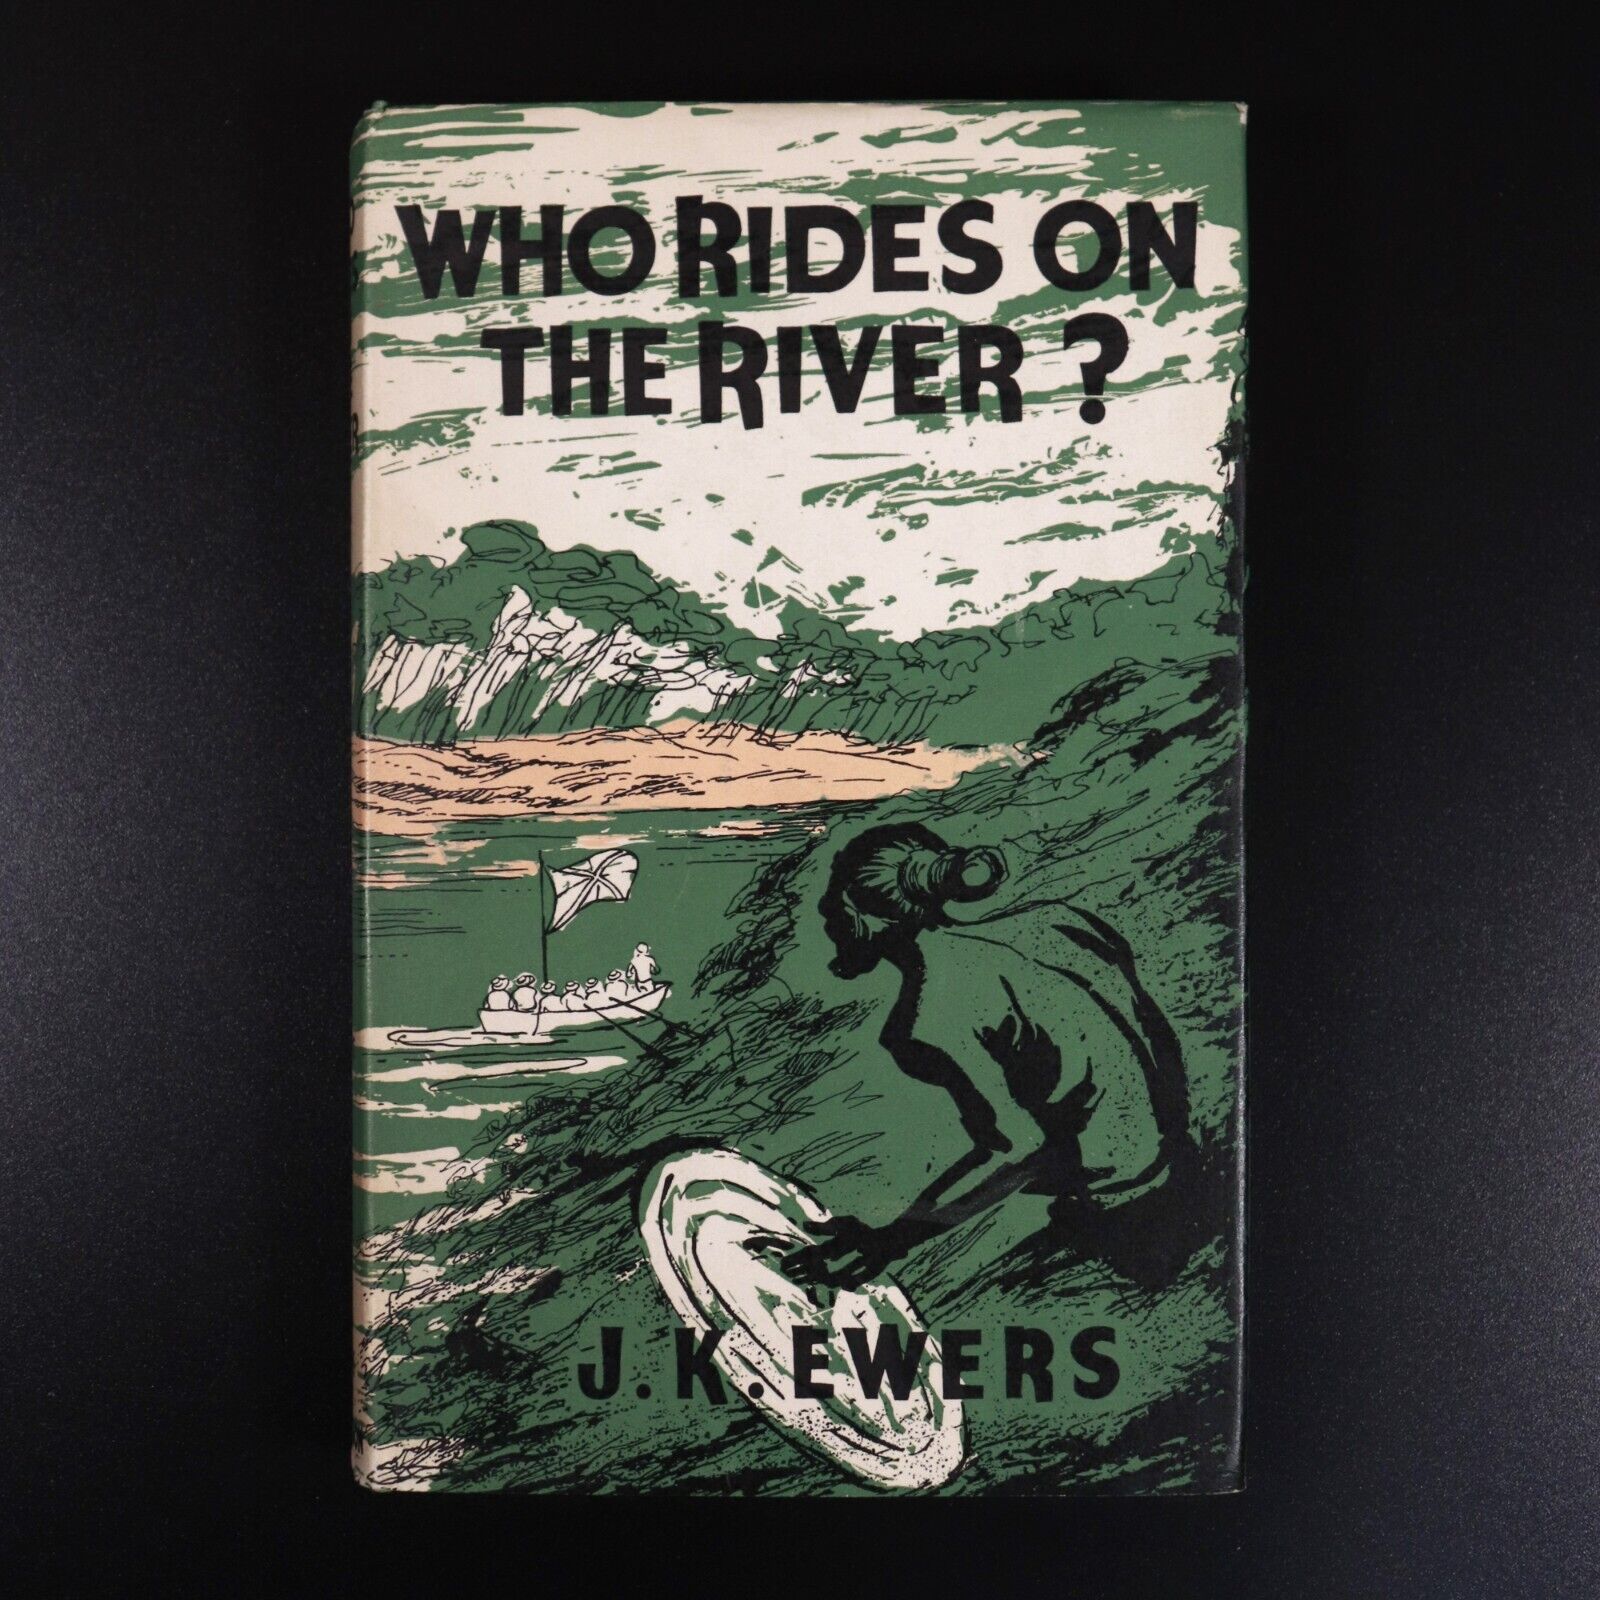 1956 Who Rides On The River by J.K. Ewers Australian Exploration History Book